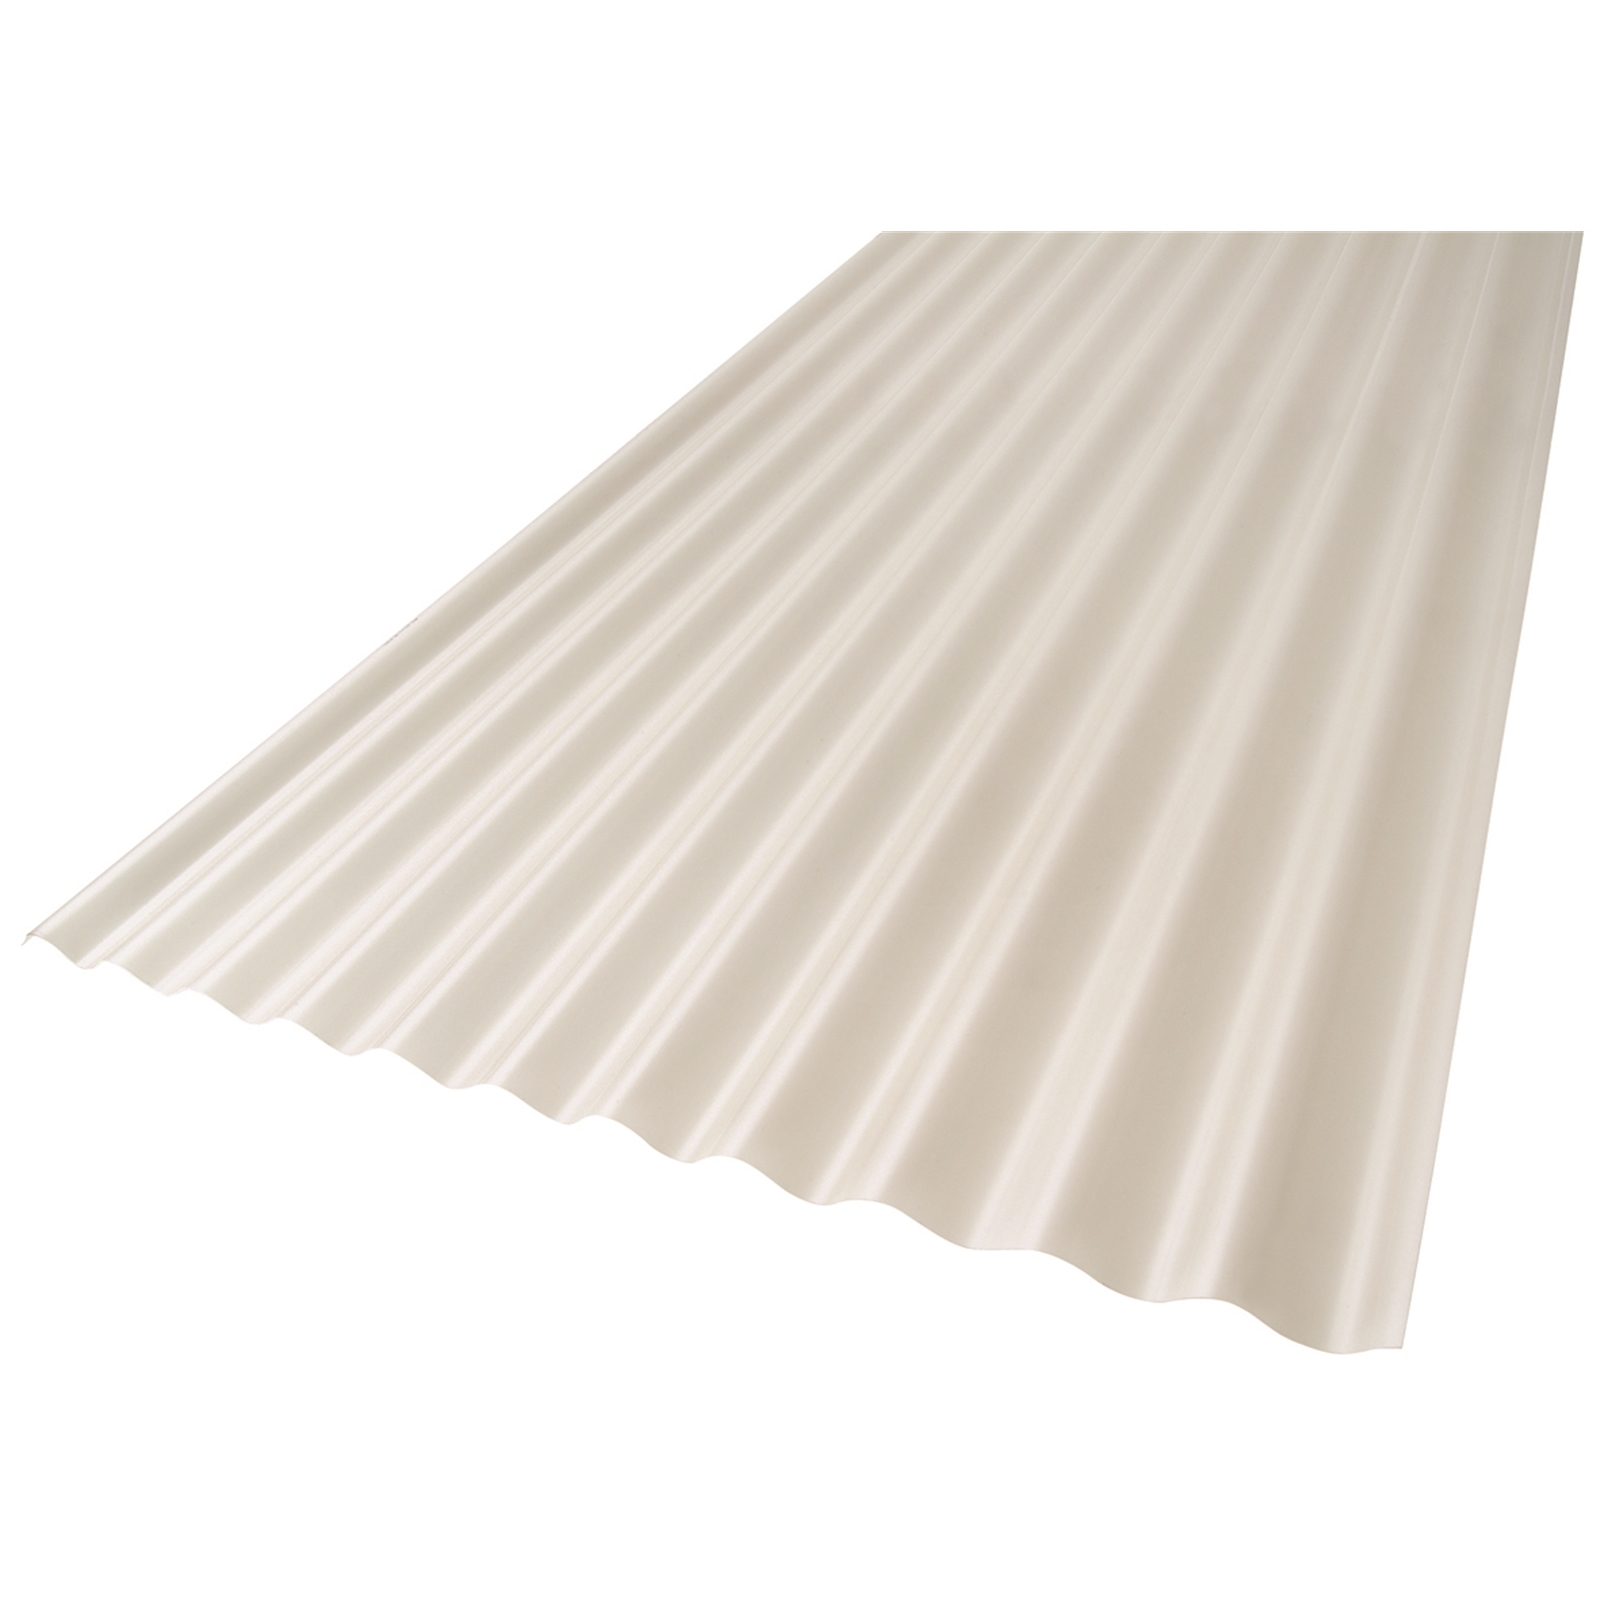 Suntuf Solarsmart 3.6m Diffused Ice Polycarbonate Roofing